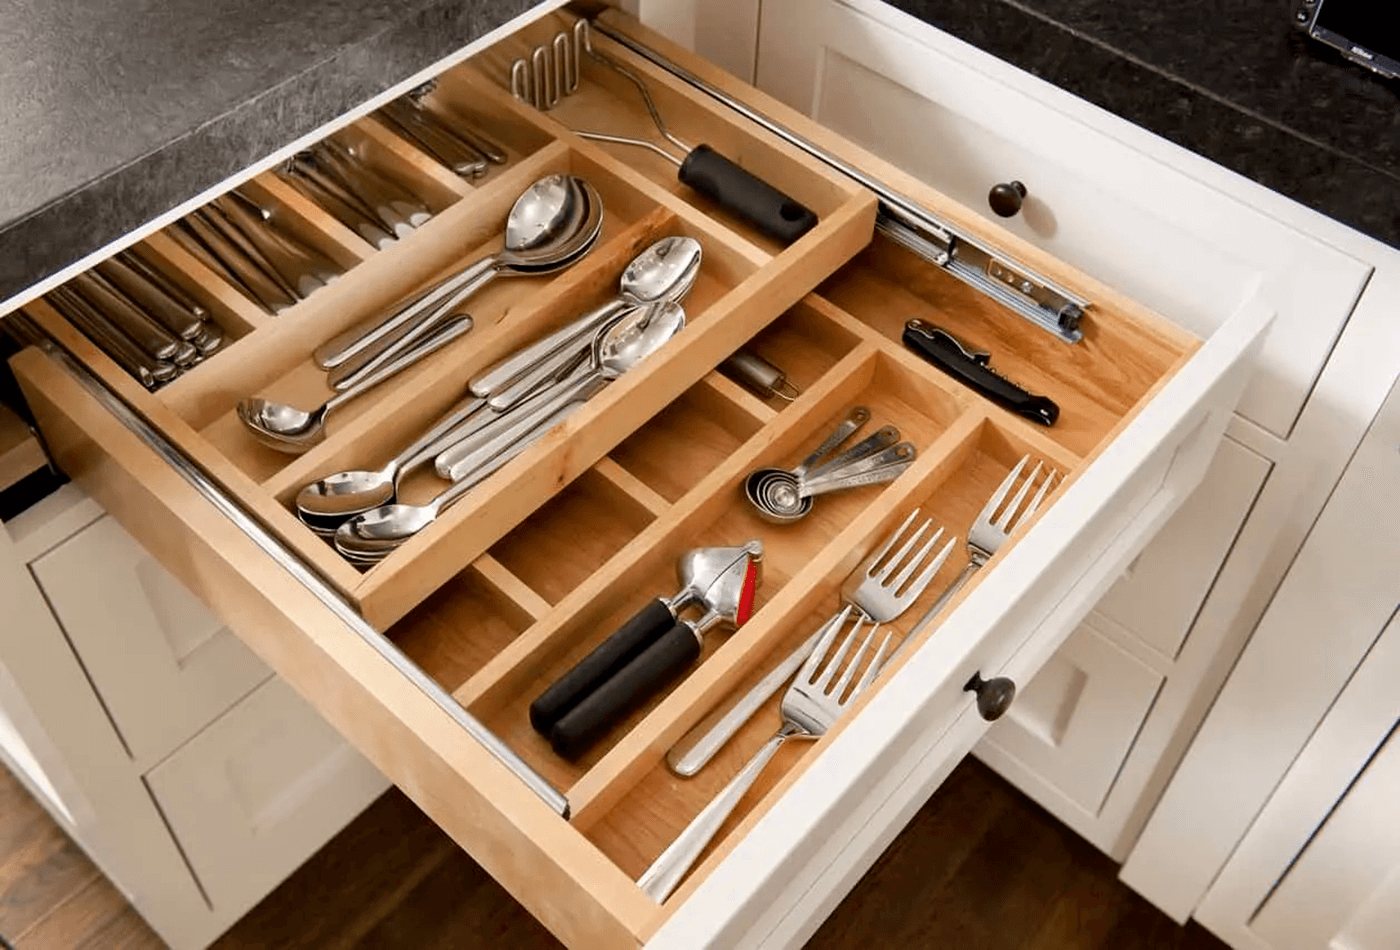 Where to put utensils in a kitchen without drawers